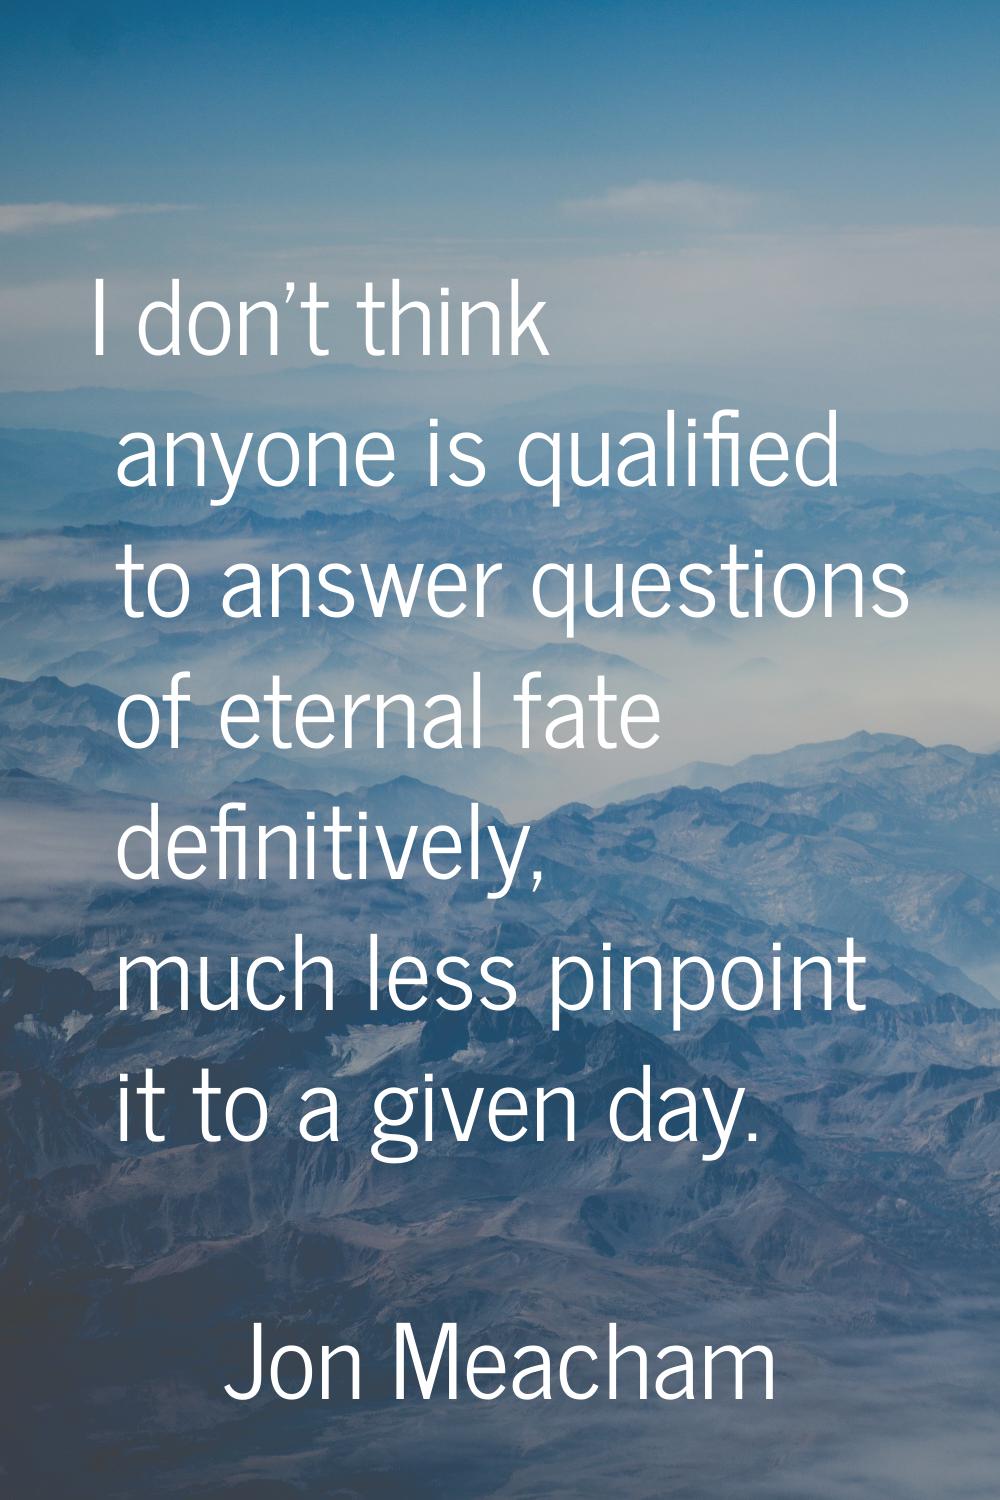 I don't think anyone is qualified to answer questions of eternal fate definitively, much less pinpo